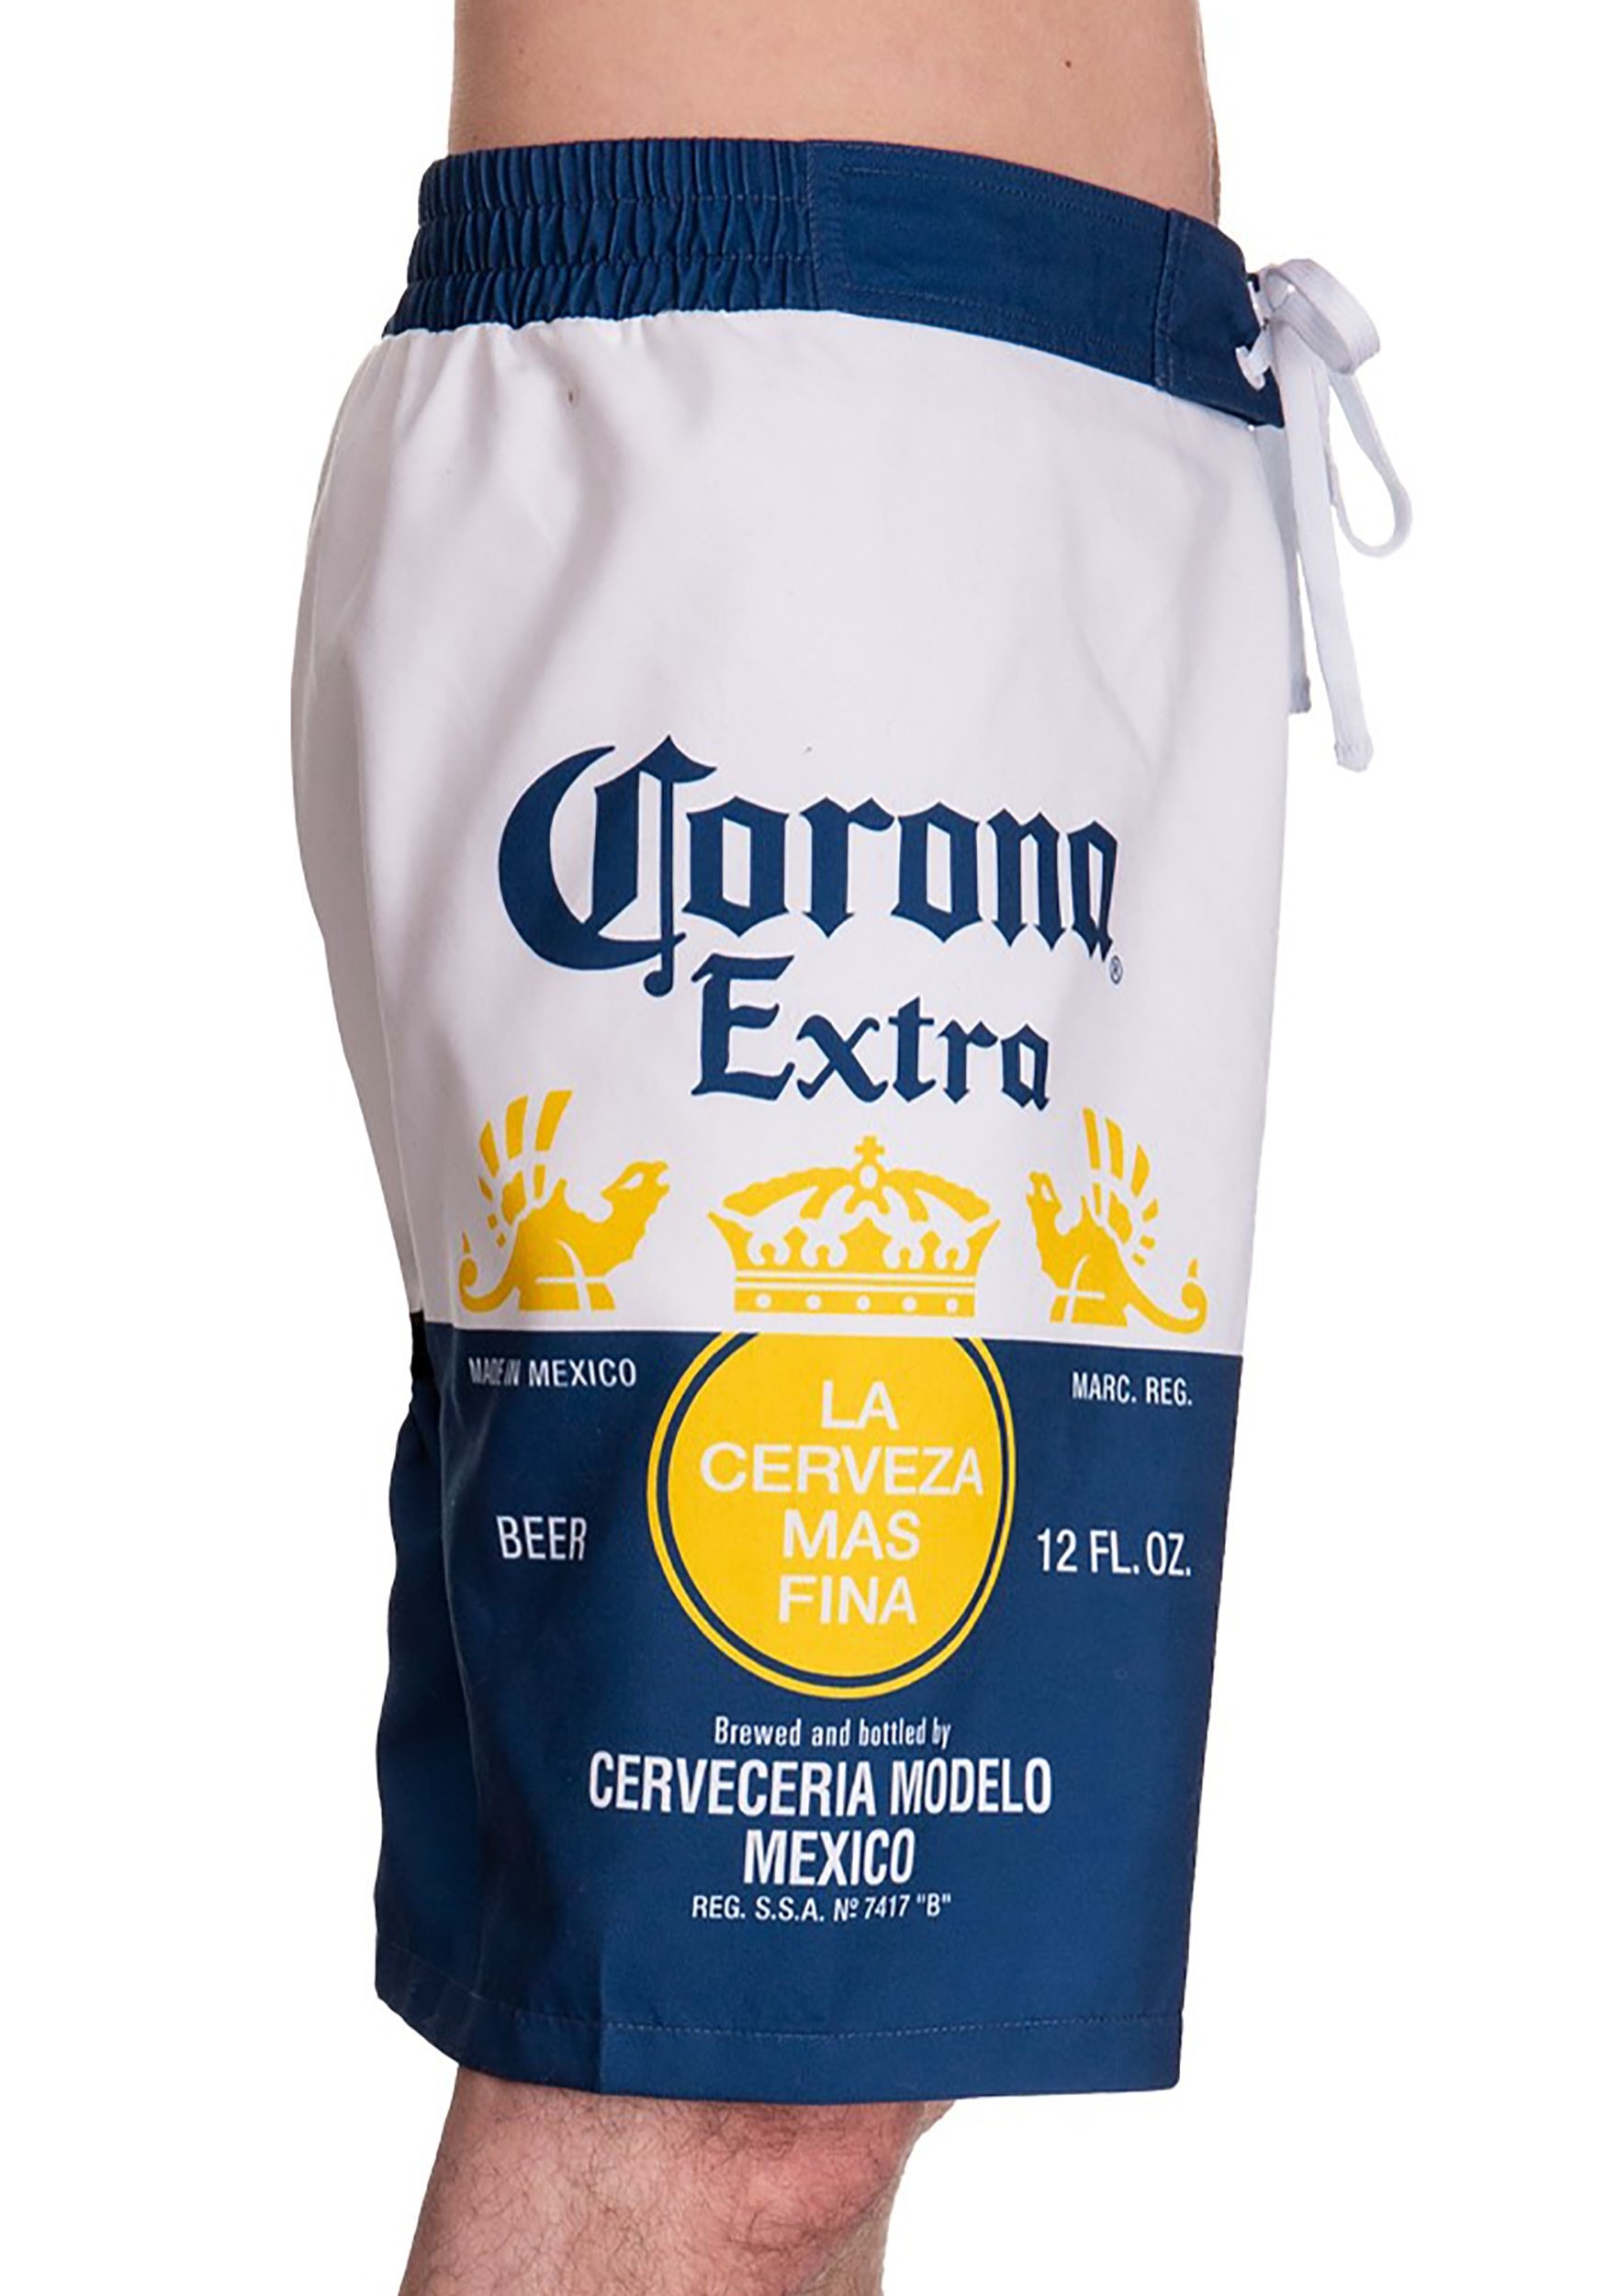 Beach Shorts Beach Wear with Pockets Men Waterproof Swim Trunks Quick Dry Corona-Extra-Beer-Alcohol-Drink-Blue 